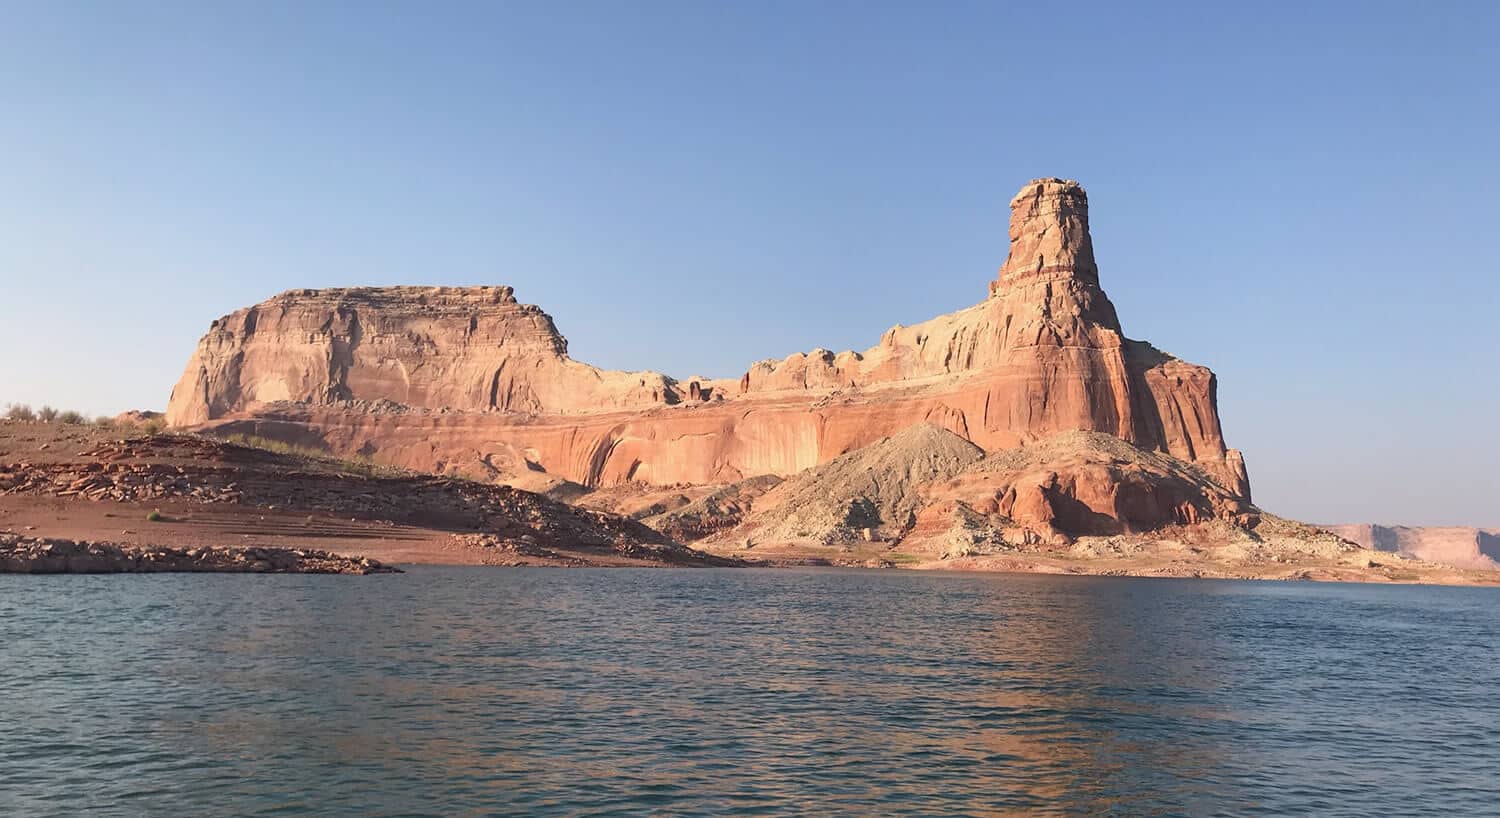 View across rippling water toward red and tan rock formations with jagged edges.